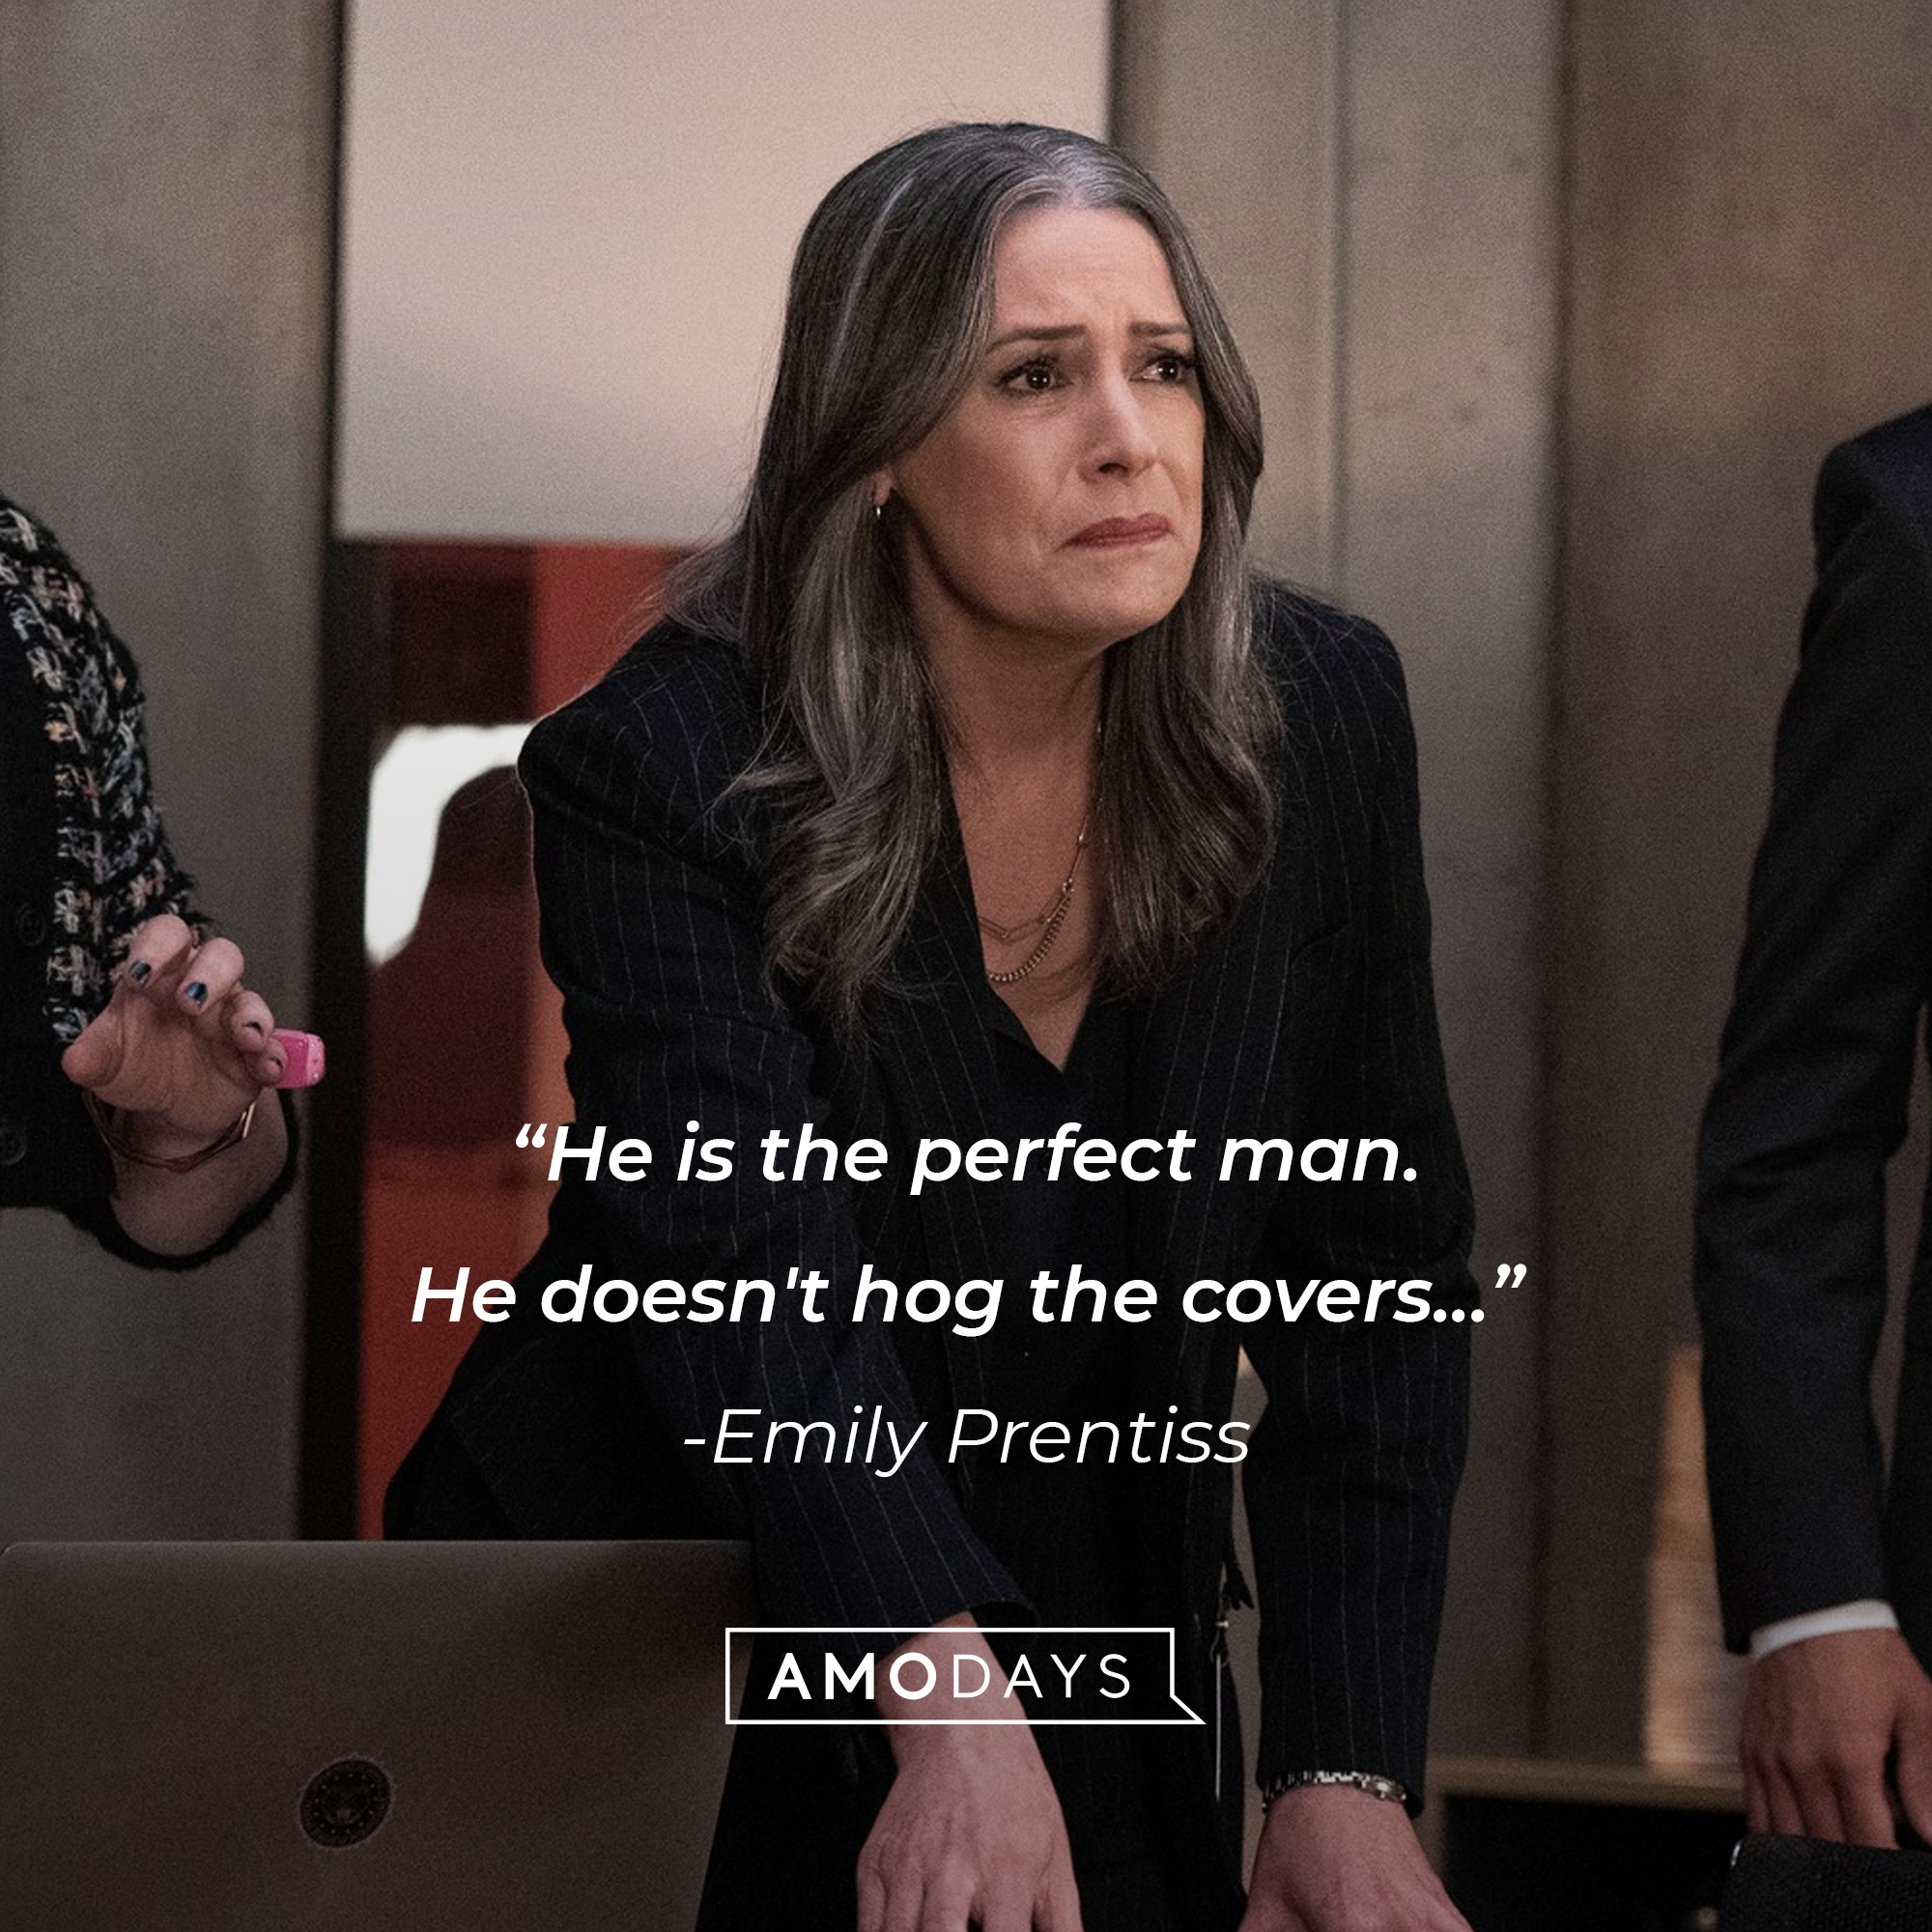 Emily Prentiss' quote: "He is the perfect man. He doesn't hog the covers..." | Source: Facebook.com/CriminalMinds